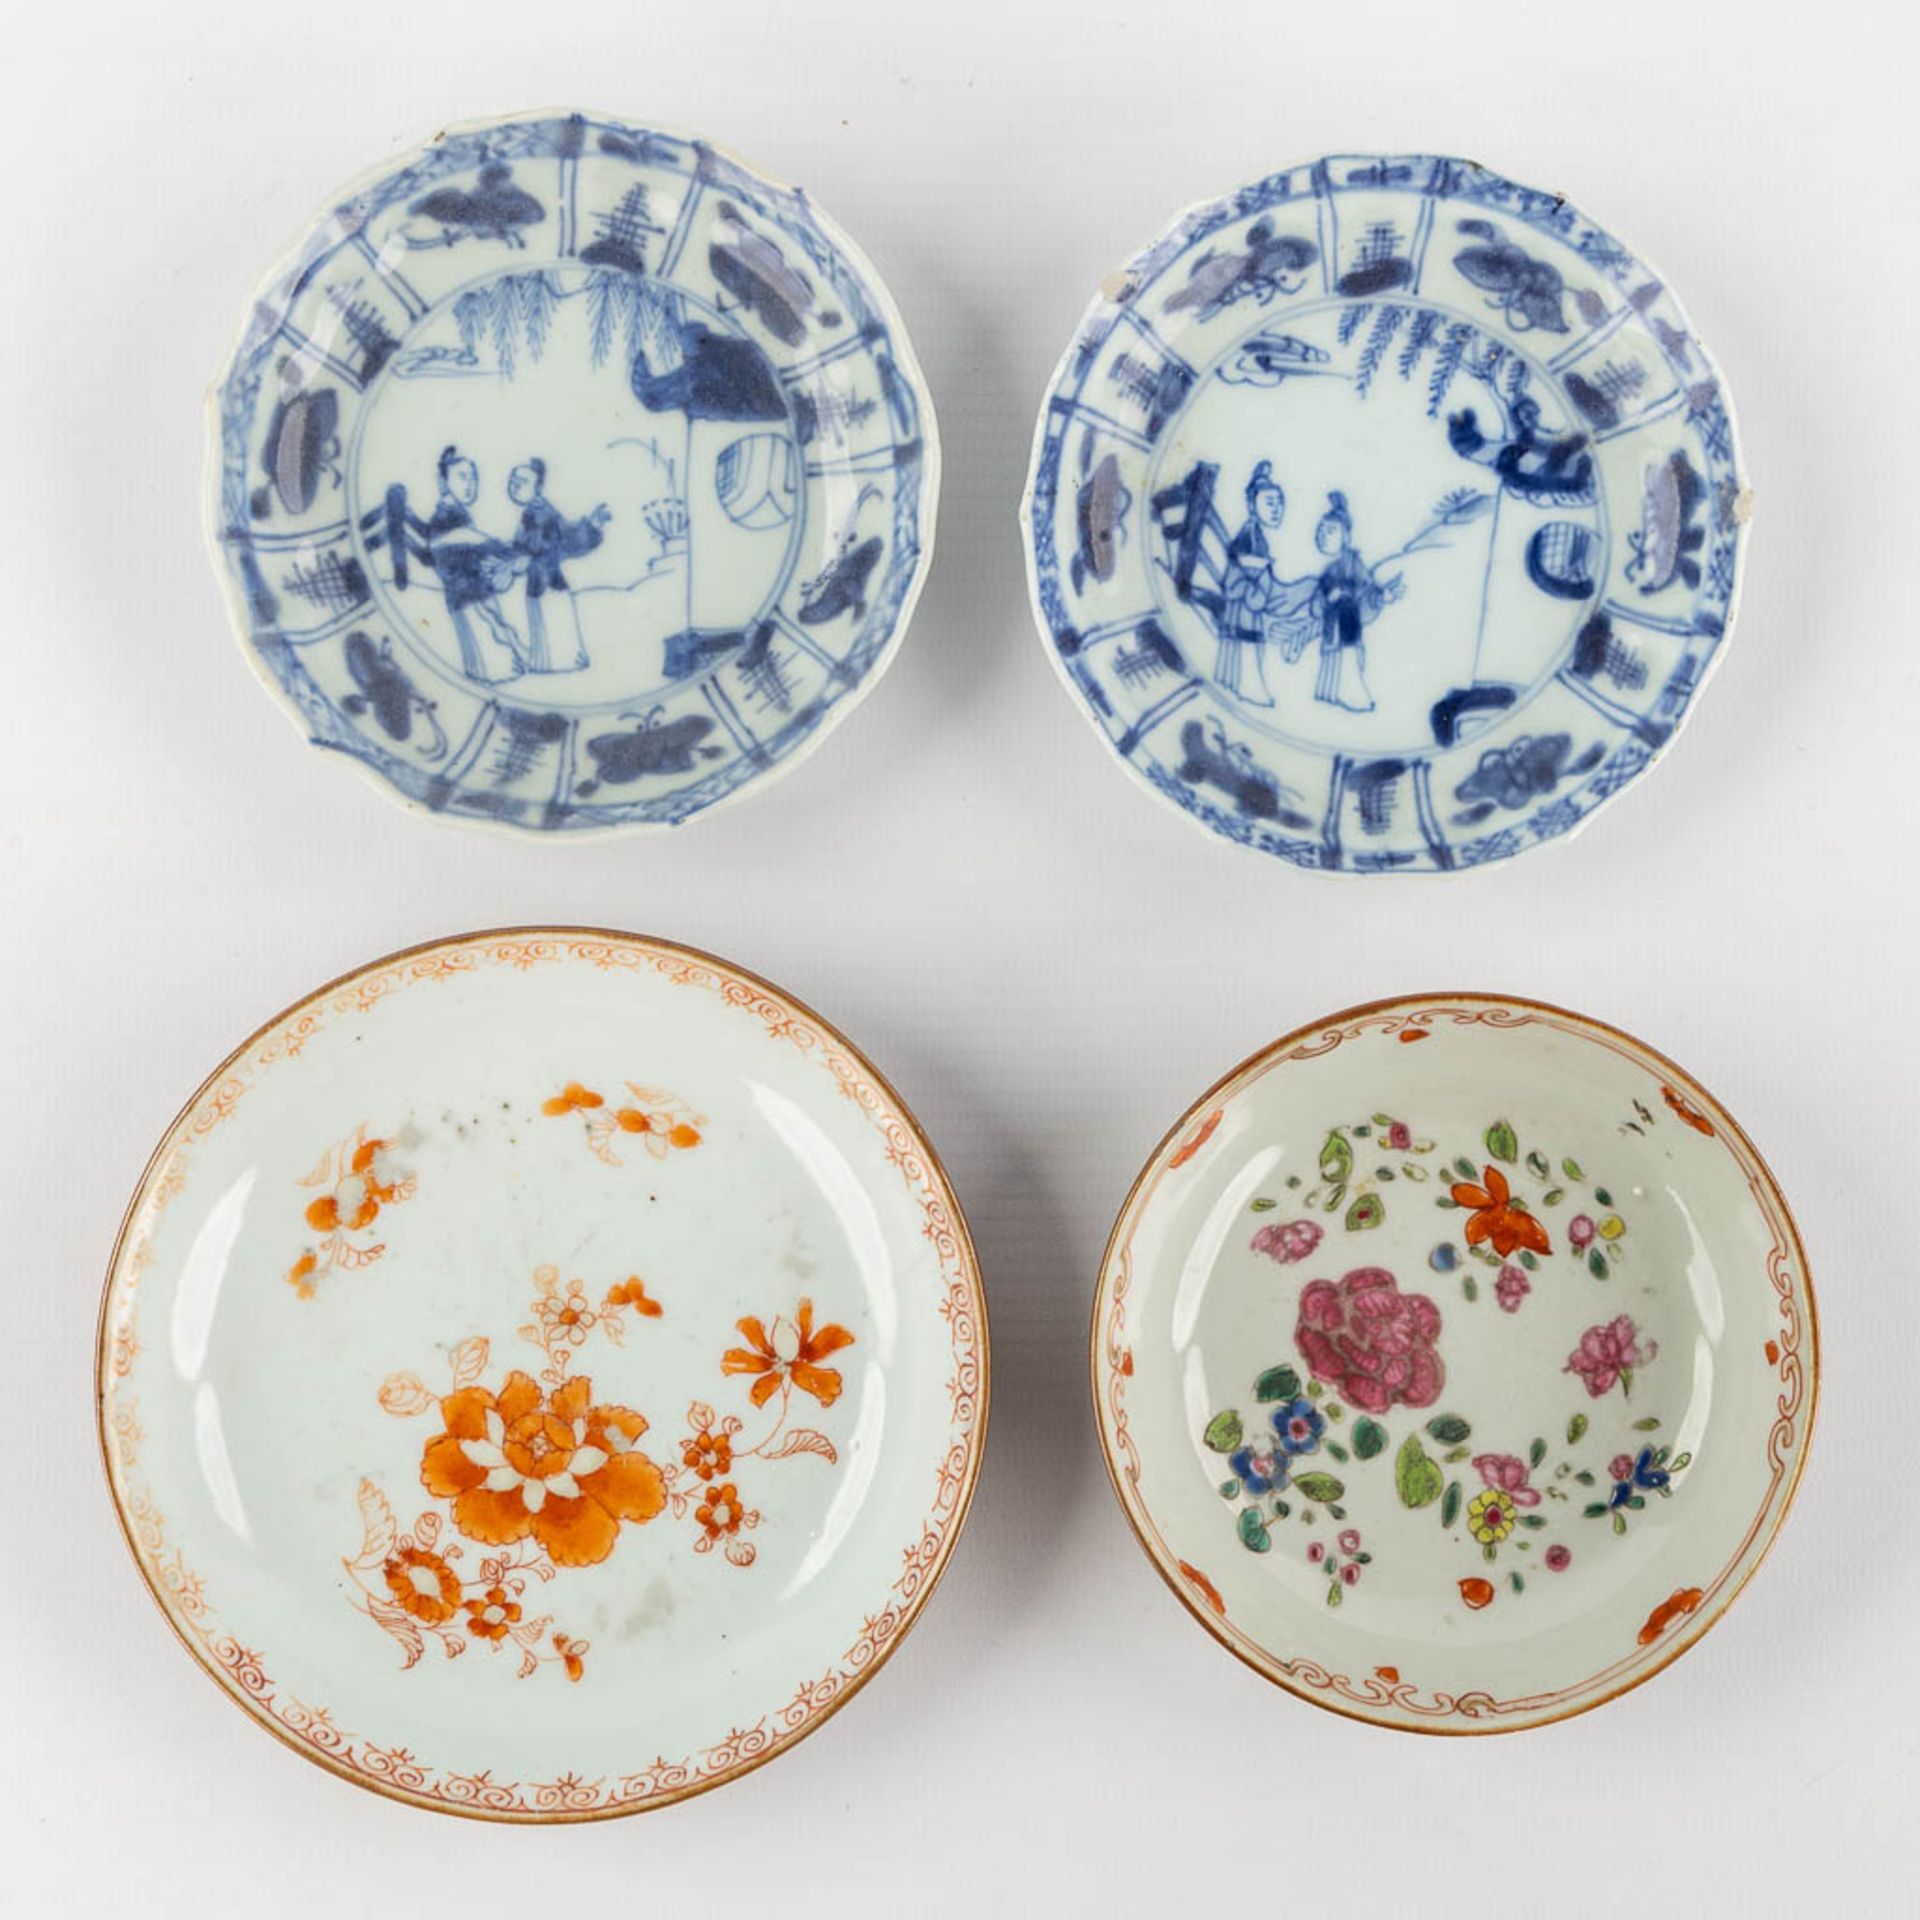 Fifteen Chinese cups, saucers and plates, blue white and Famille Roze. (D:23,4 cm) - Image 9 of 15